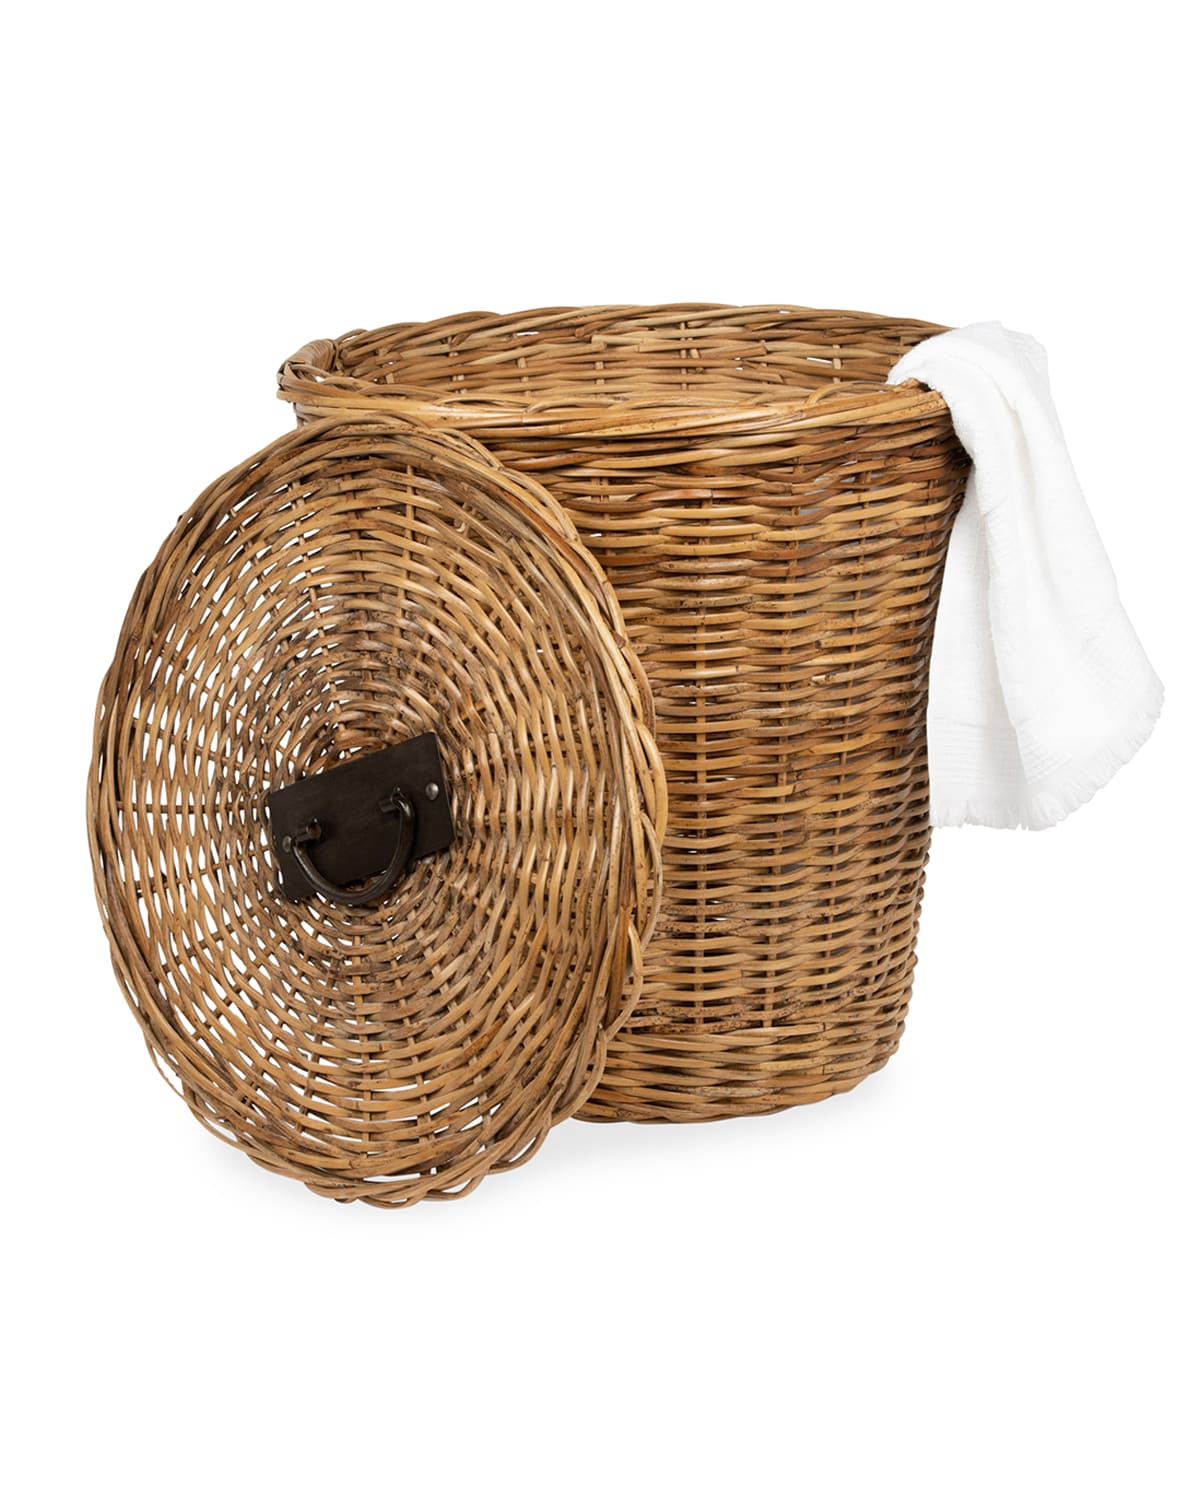 Pigeon & Poodle Lamia Laundry Hamper In Natural